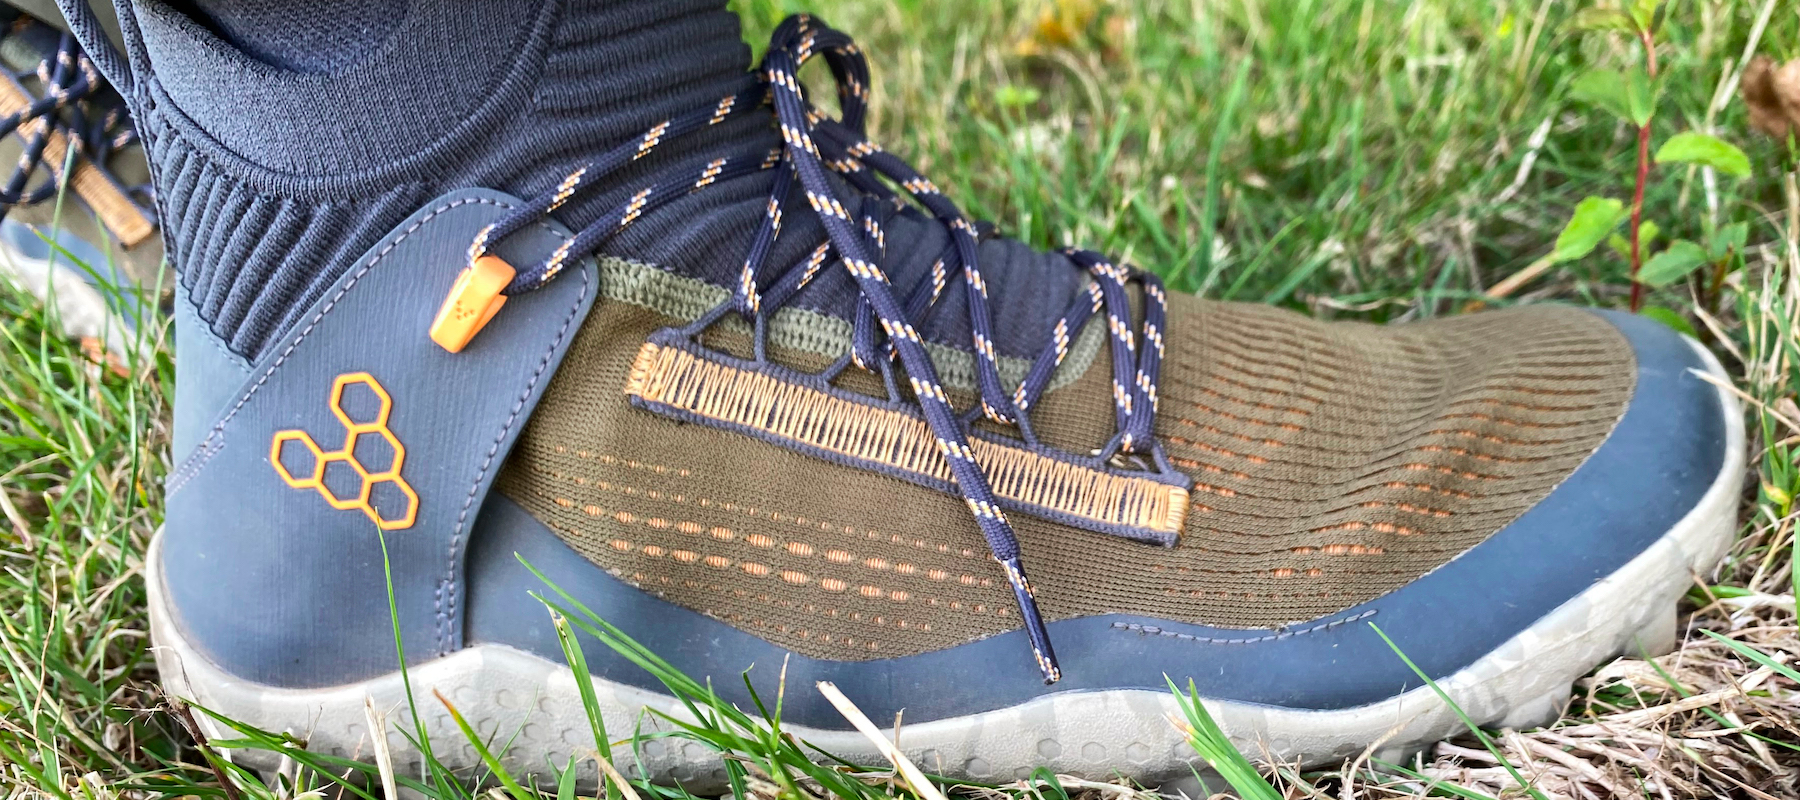 Vivobarefoot Magna Lite SG hiking boot review: superb trail feel with few compromises